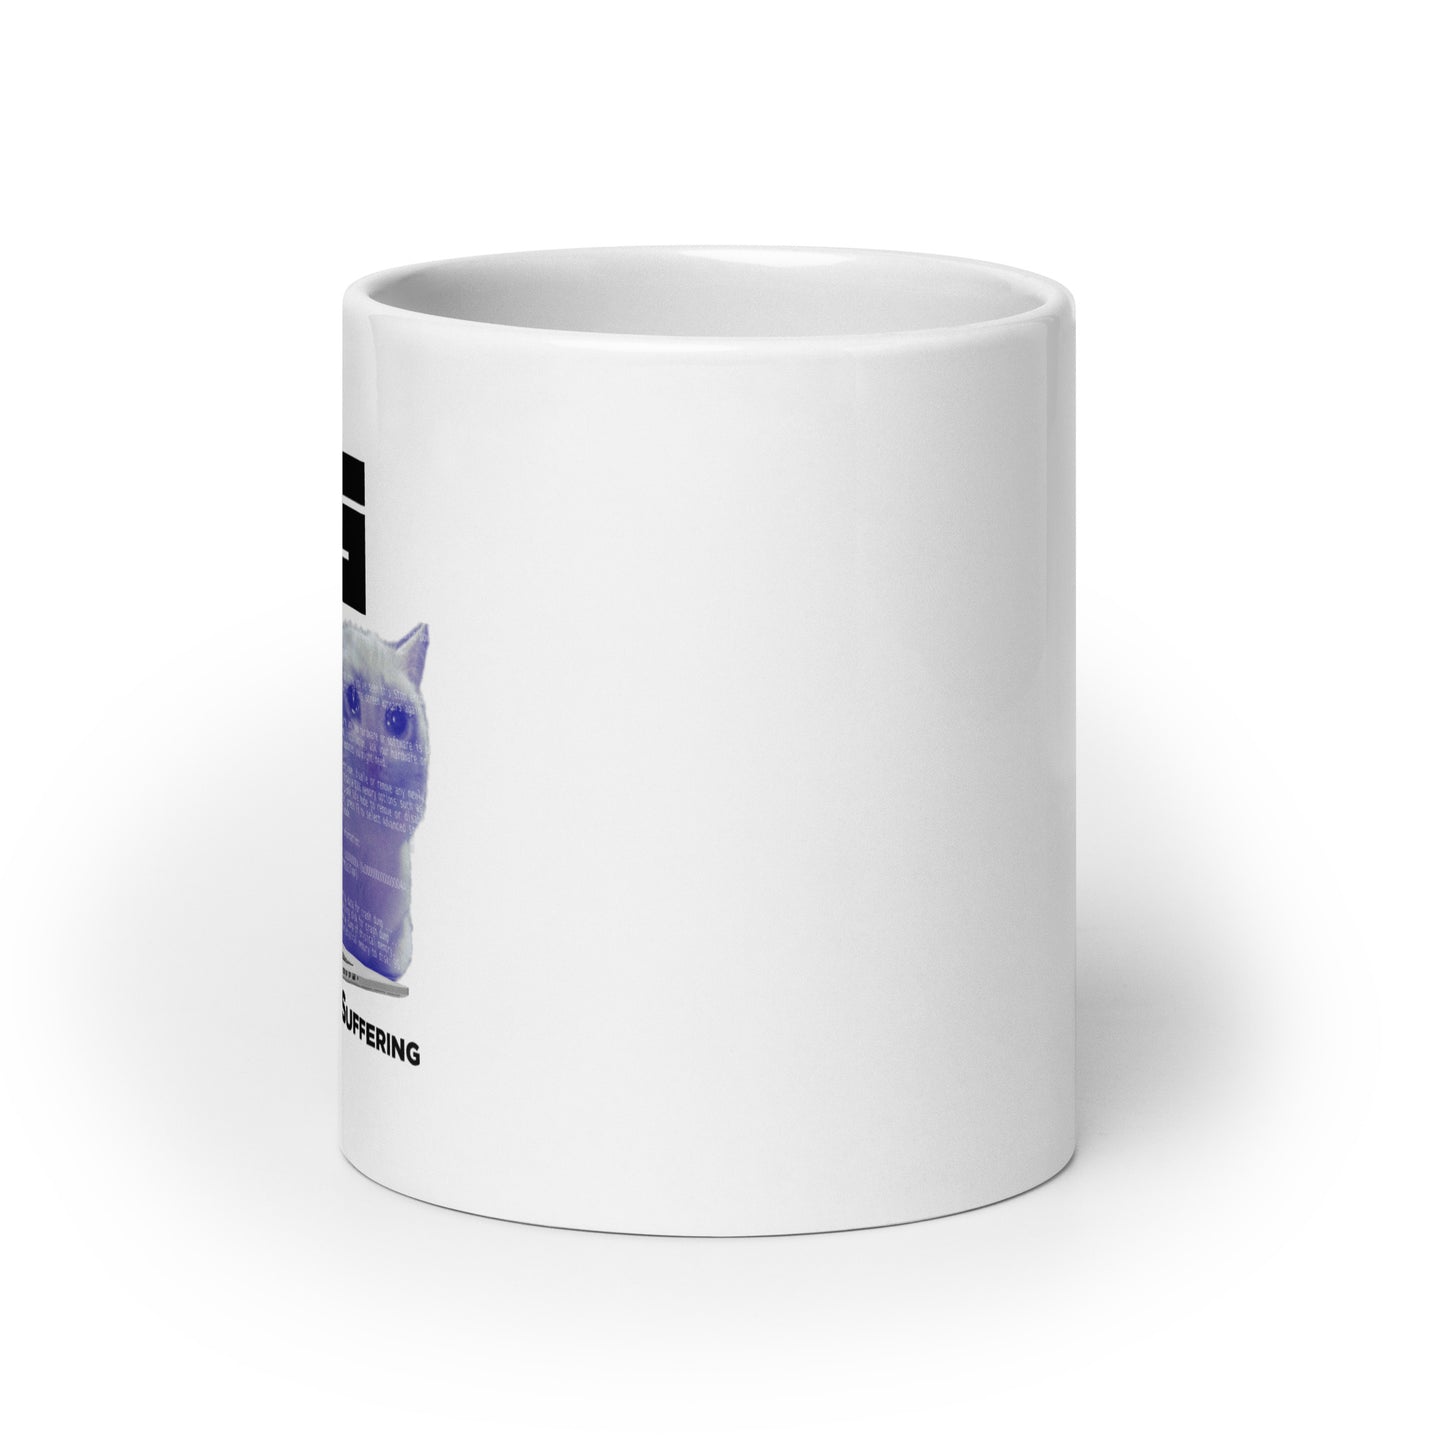 CSS (Constant State of Suffering) mug